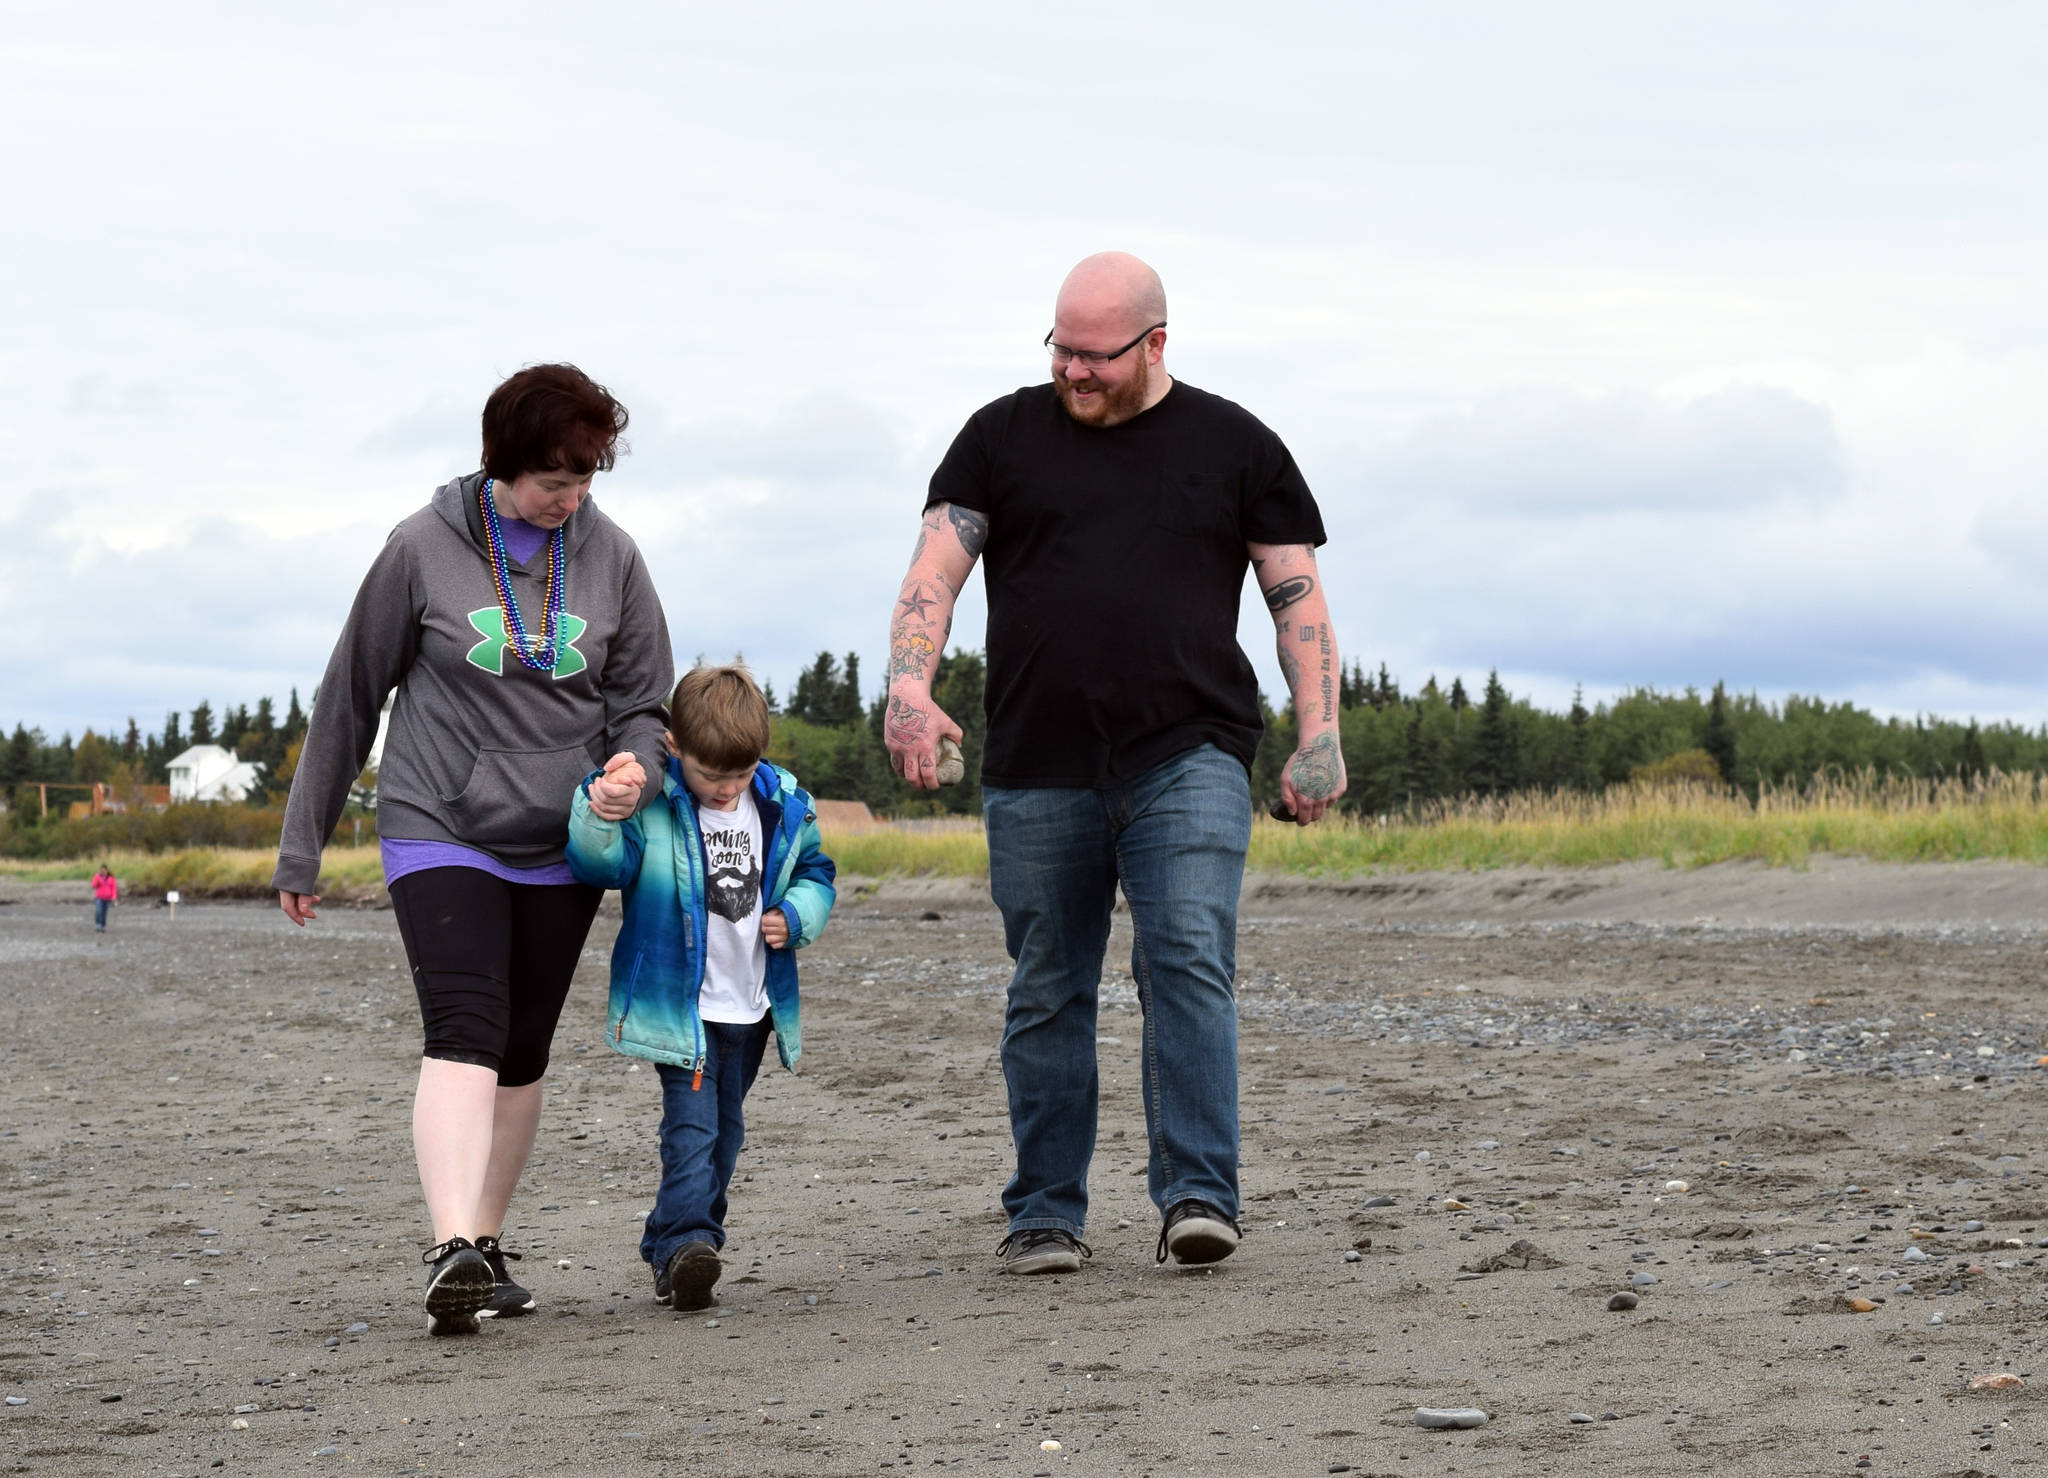 Chelsey Carter, from left, Charlie Rowe Killian and Derek Killian participated in Sunday’s Out of the Darkness Kenai Walk at the Kenaitze Fishery Site in Kenai, Alaska on Sept. 10. (Photo by Kat Sorensen/Peninsula Clarion)